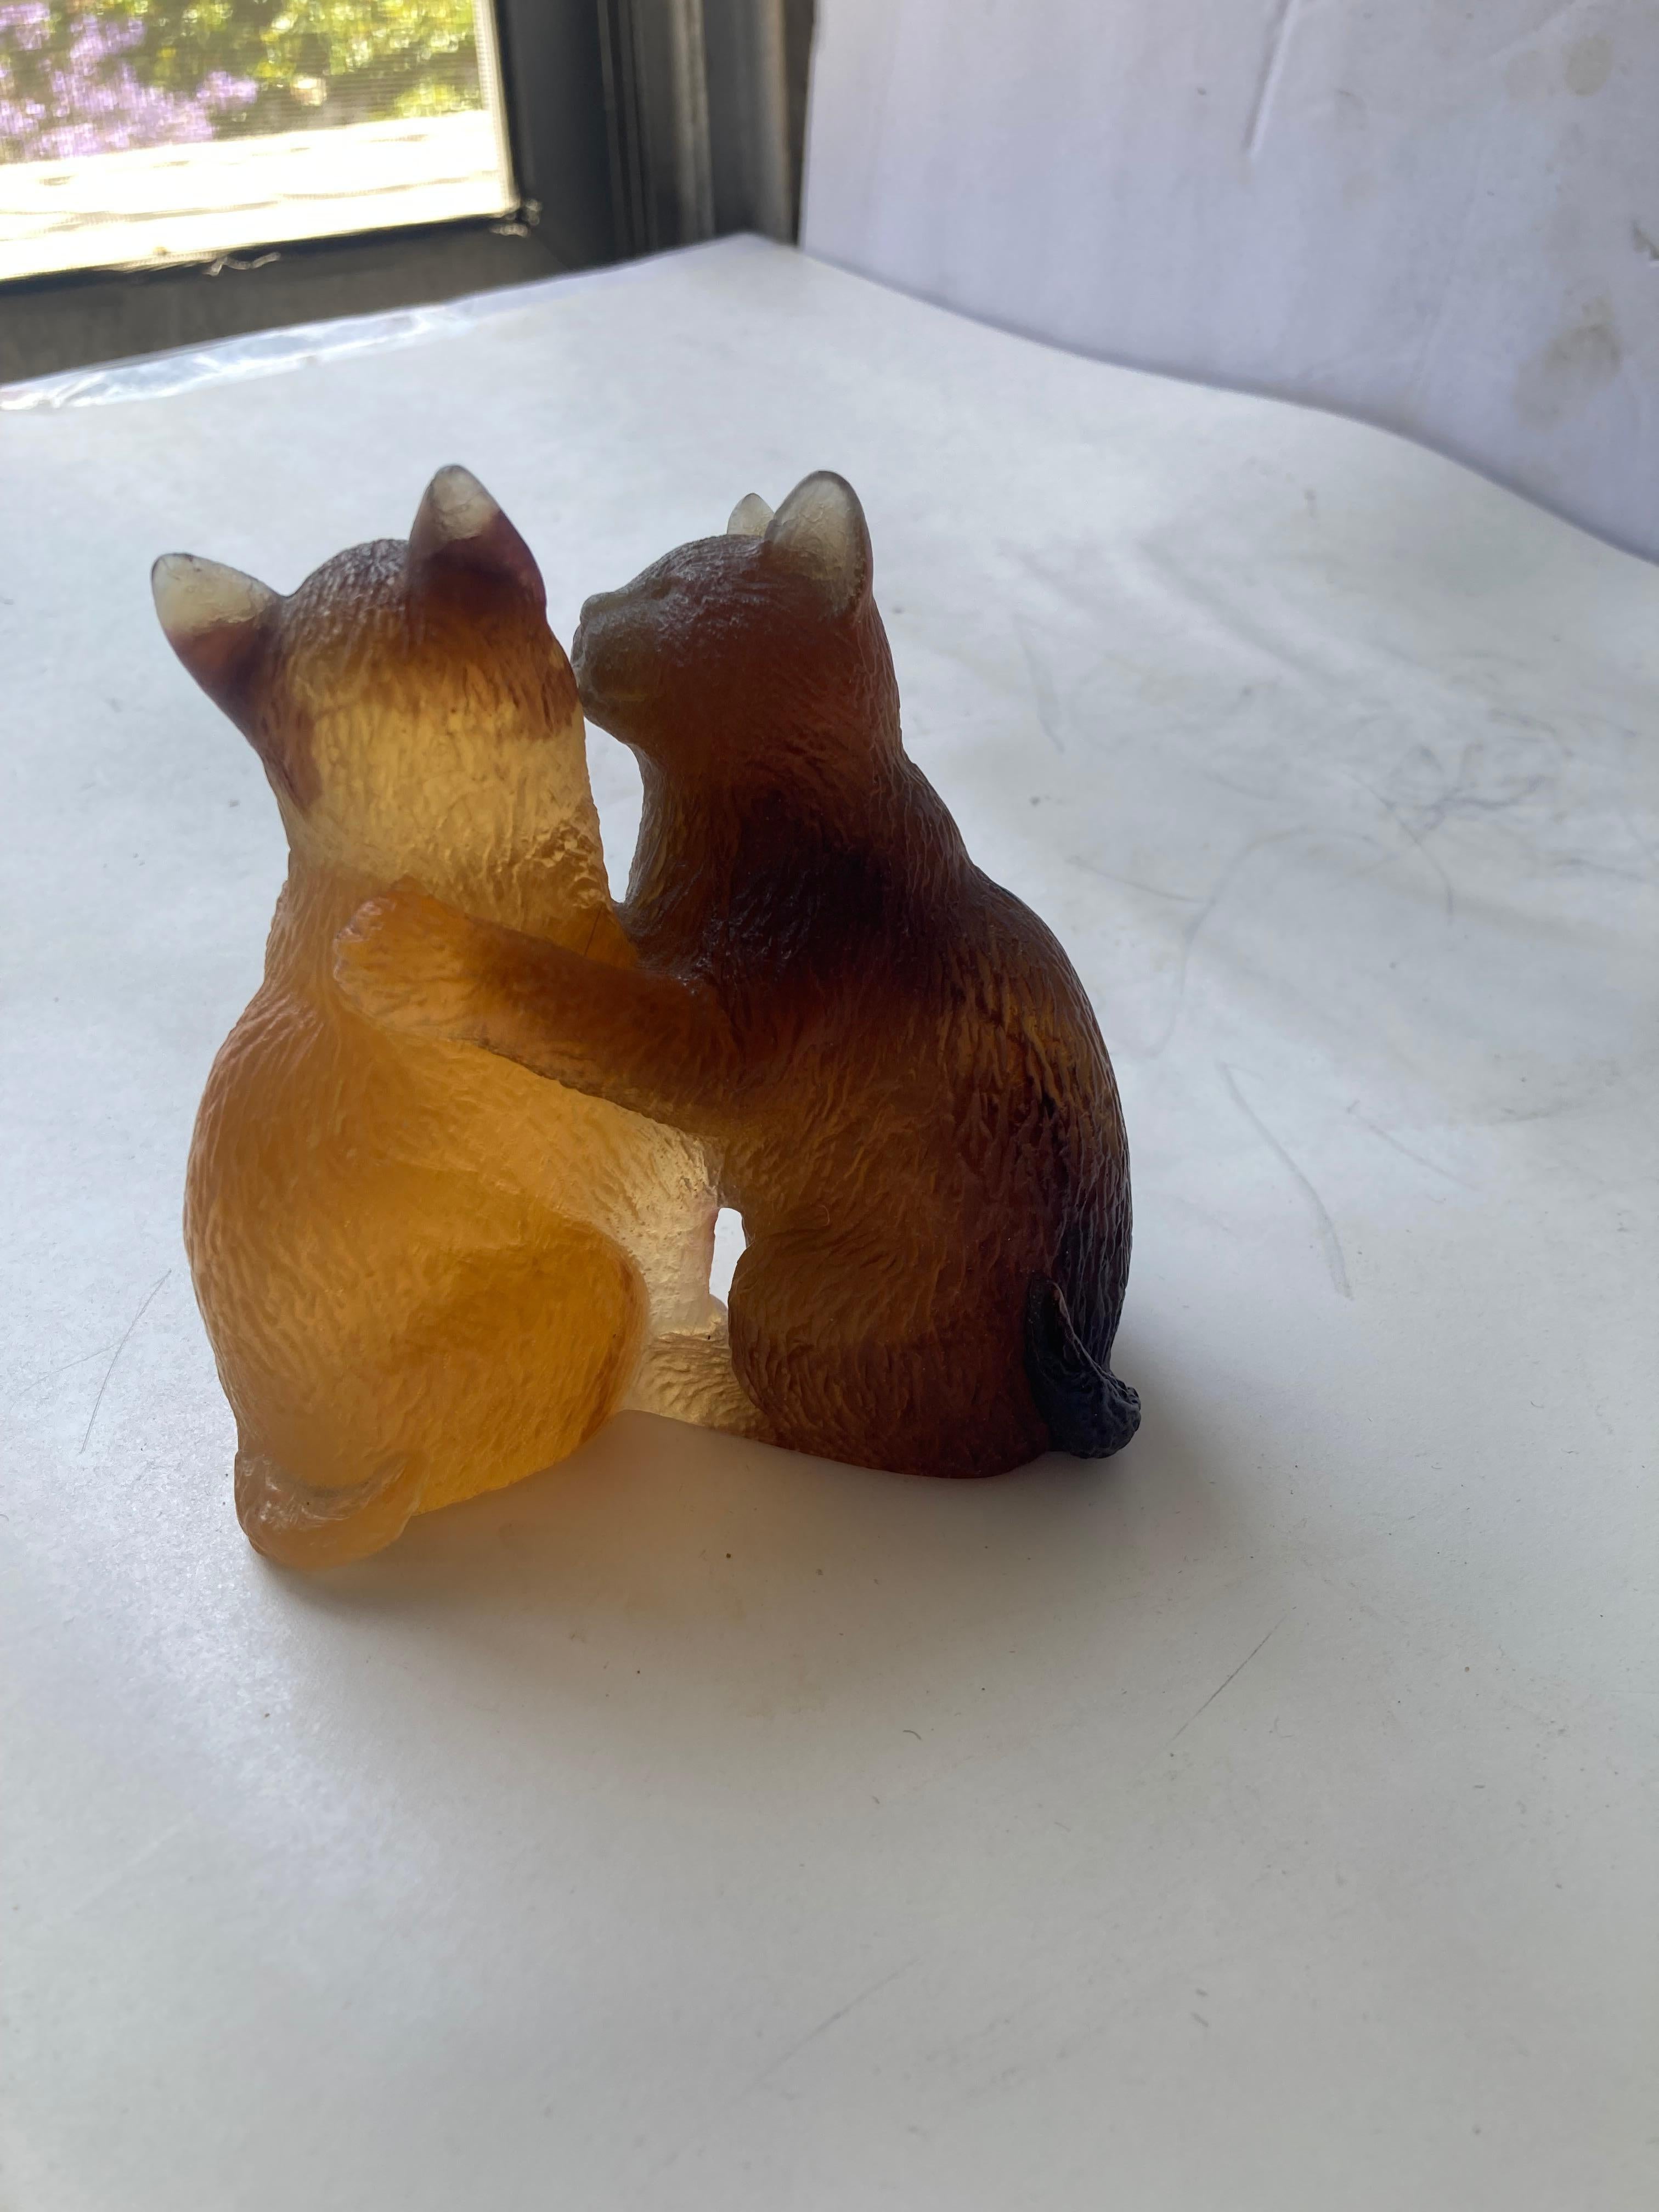 Adorable kittens kissing and playing in this beautiful Pate De Verre glass sculpture.